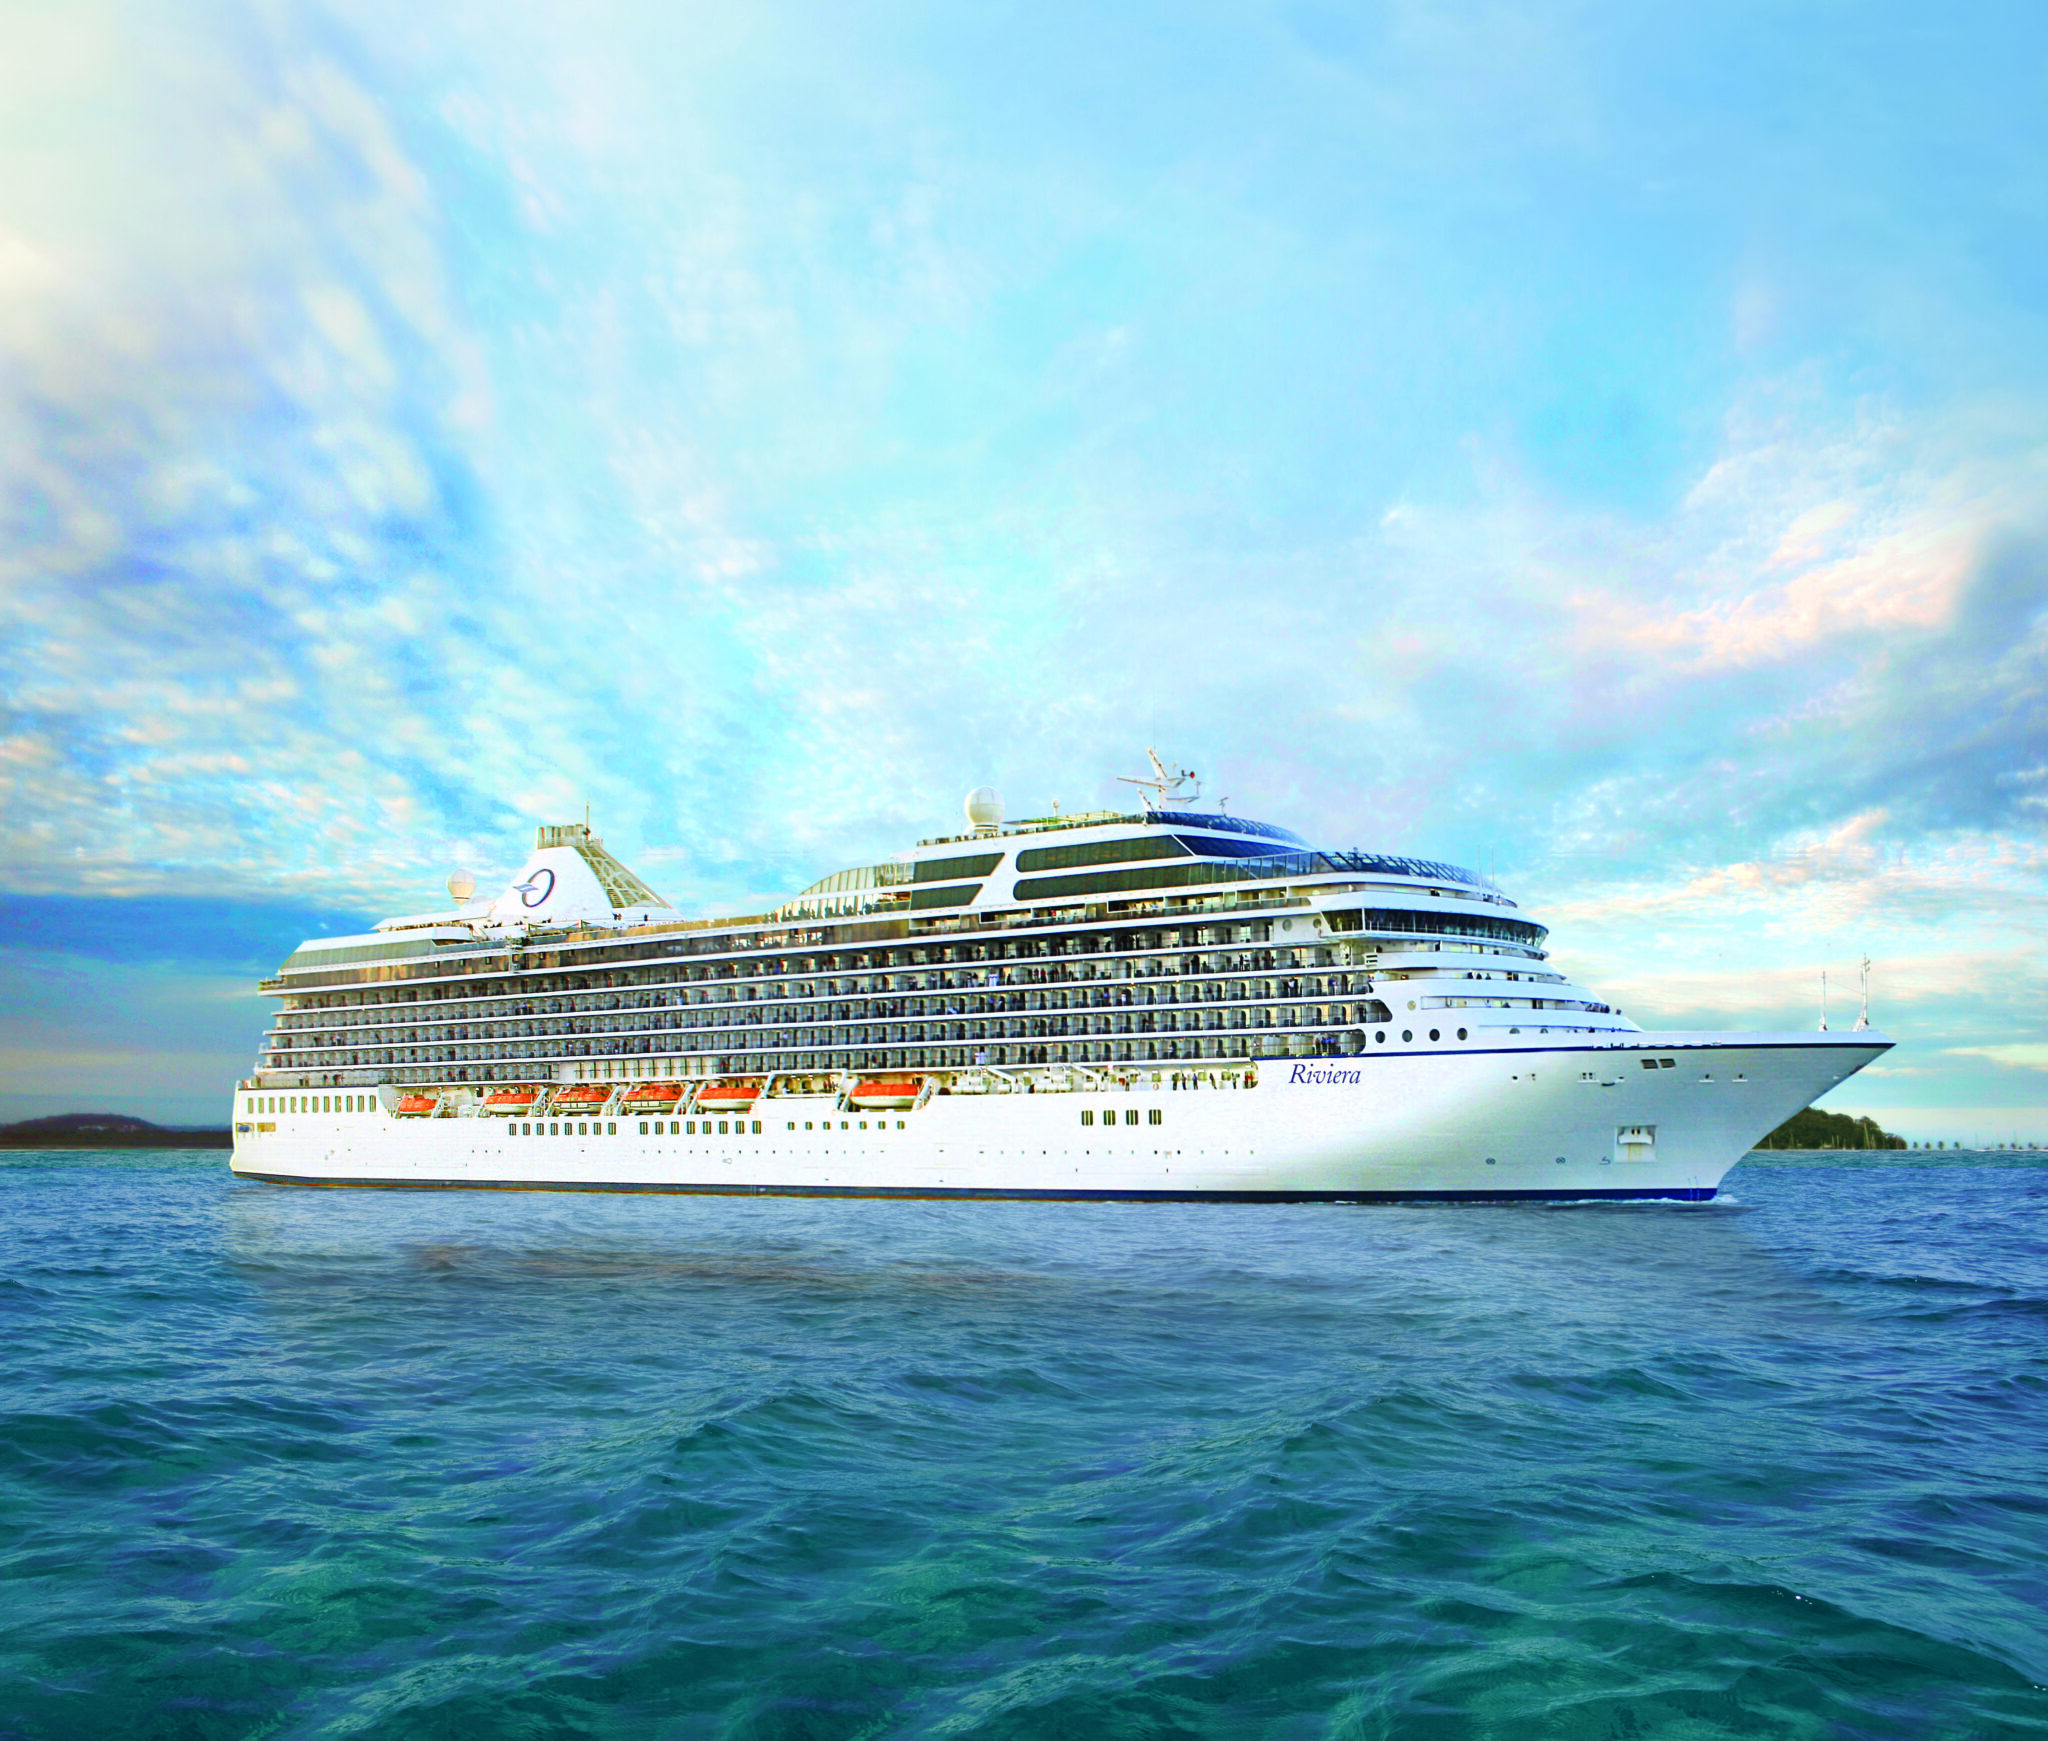 Oceania Cruises announces inspiring new voyages on Riviera